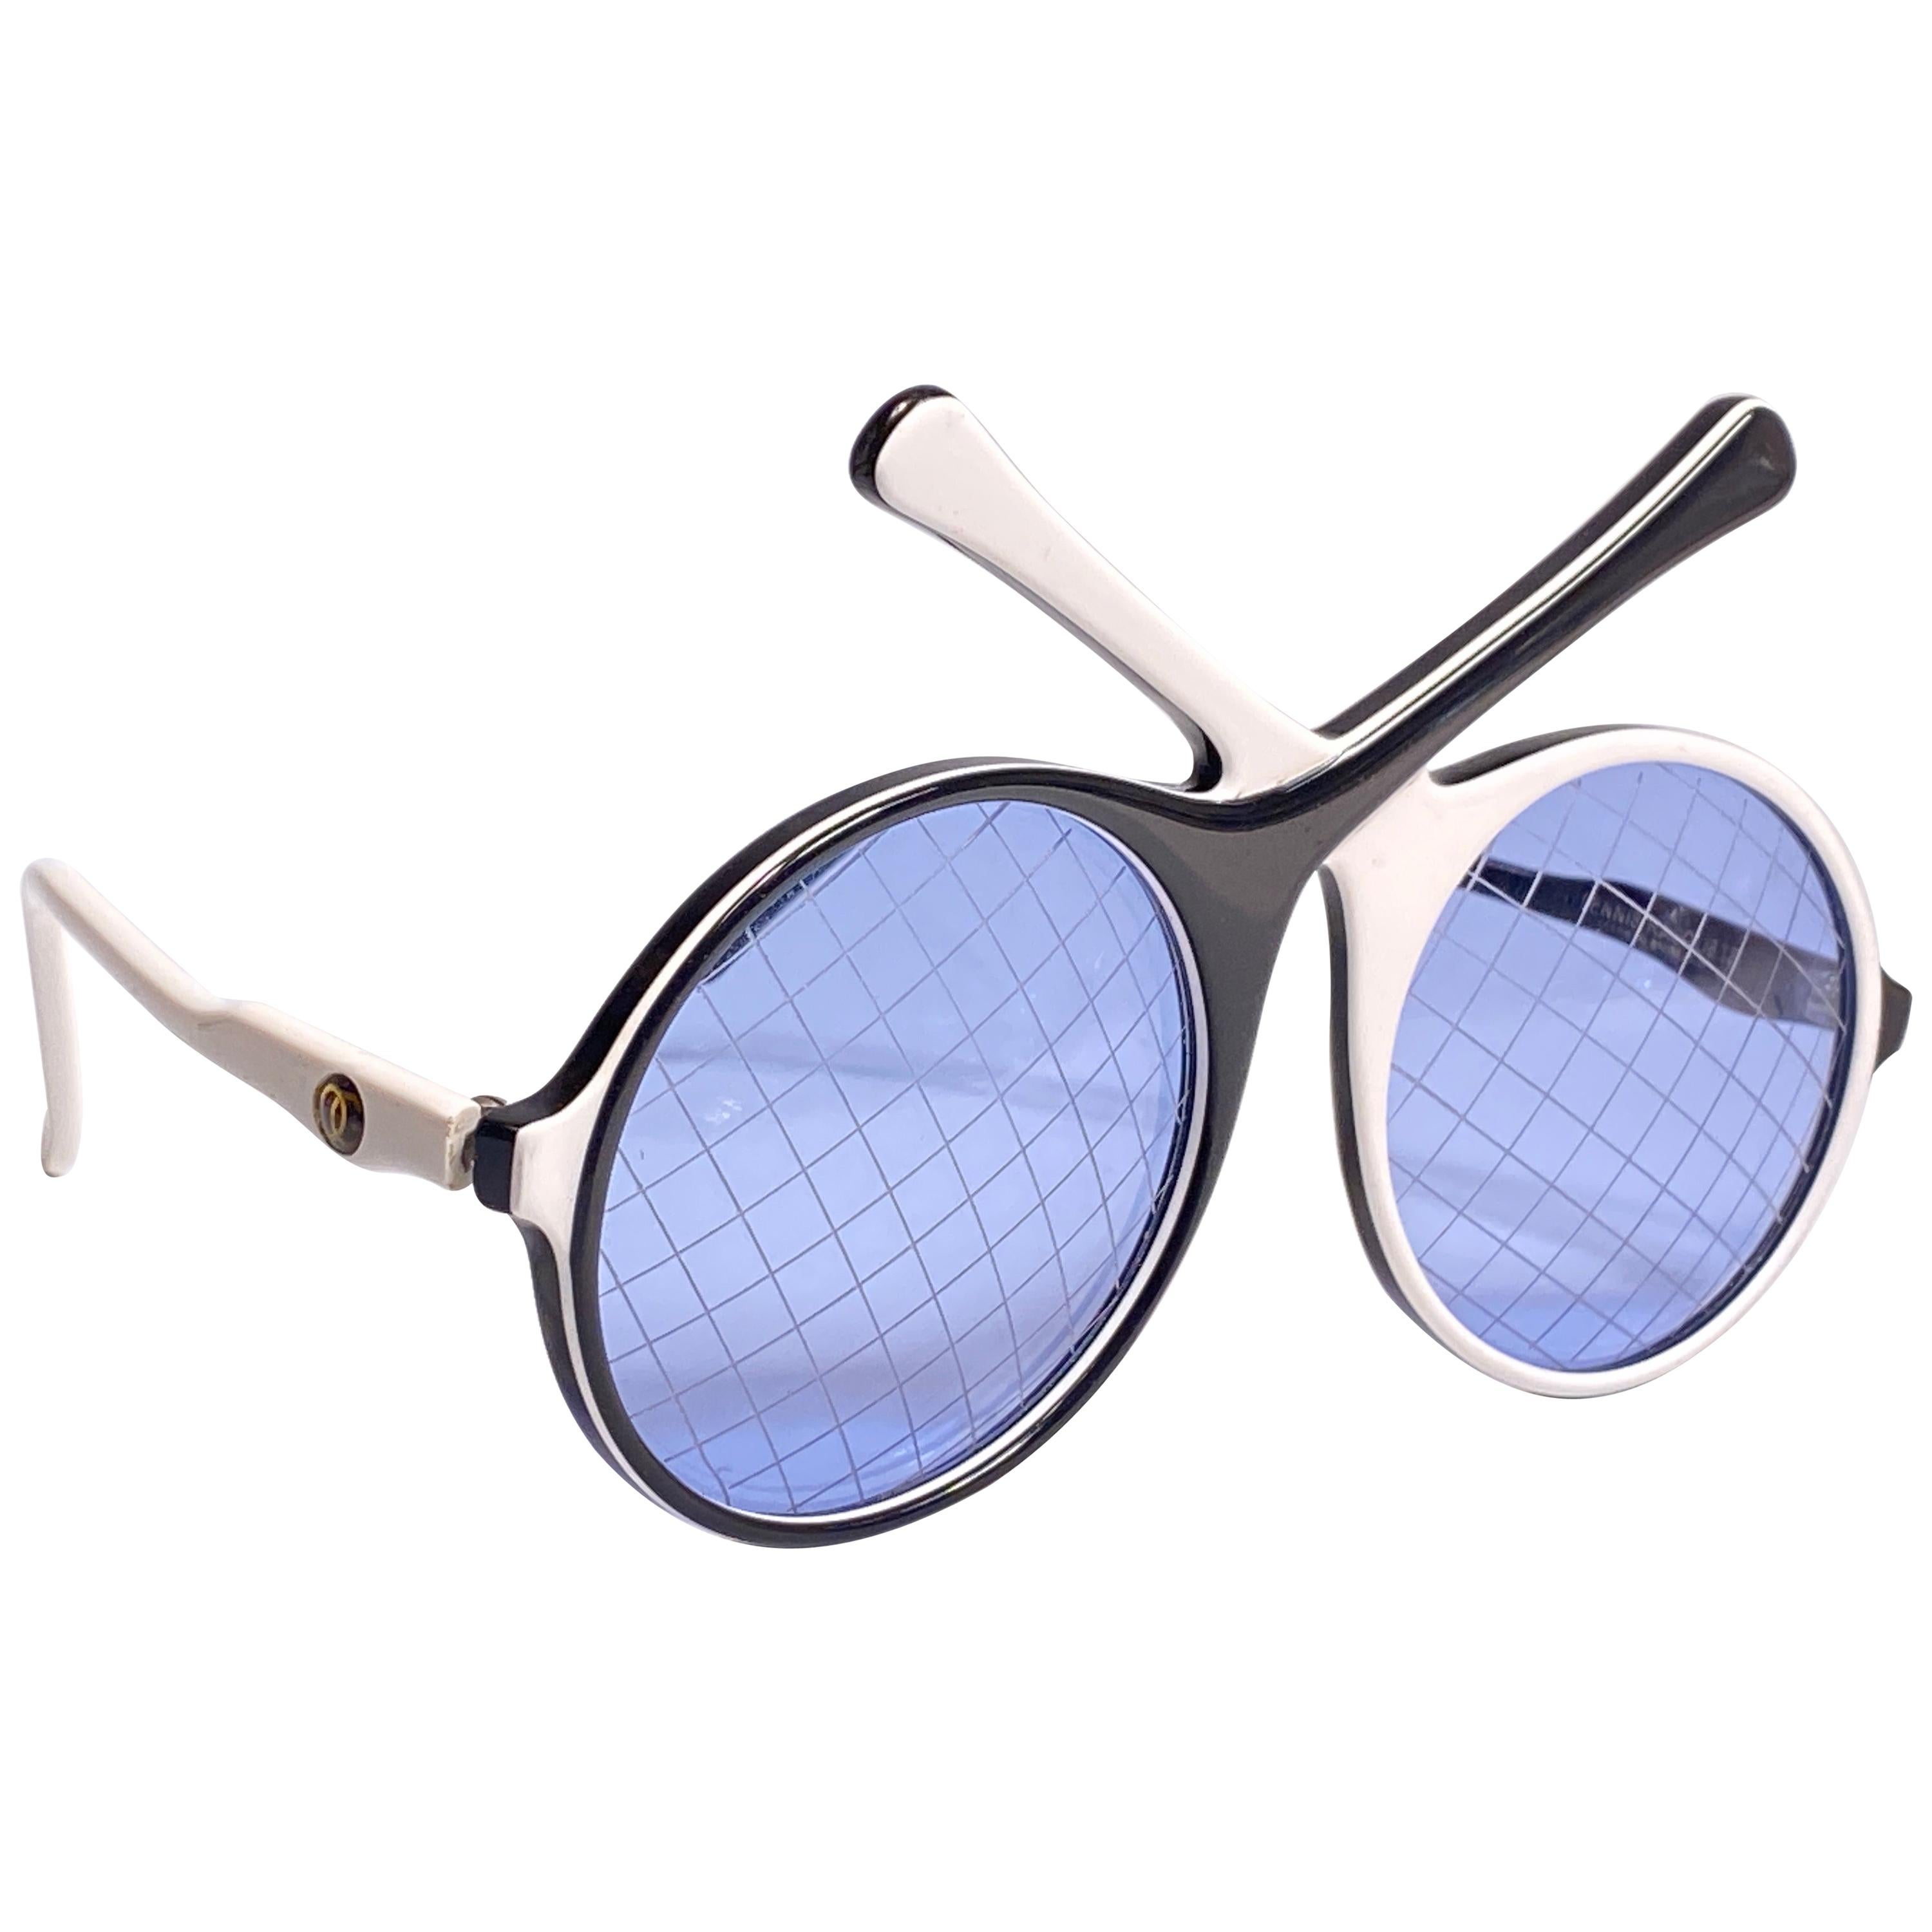 Vintage Ultra Rare Oliver Goldsmith Racquets Wimbledon 1985 England Sunglasses For Sale